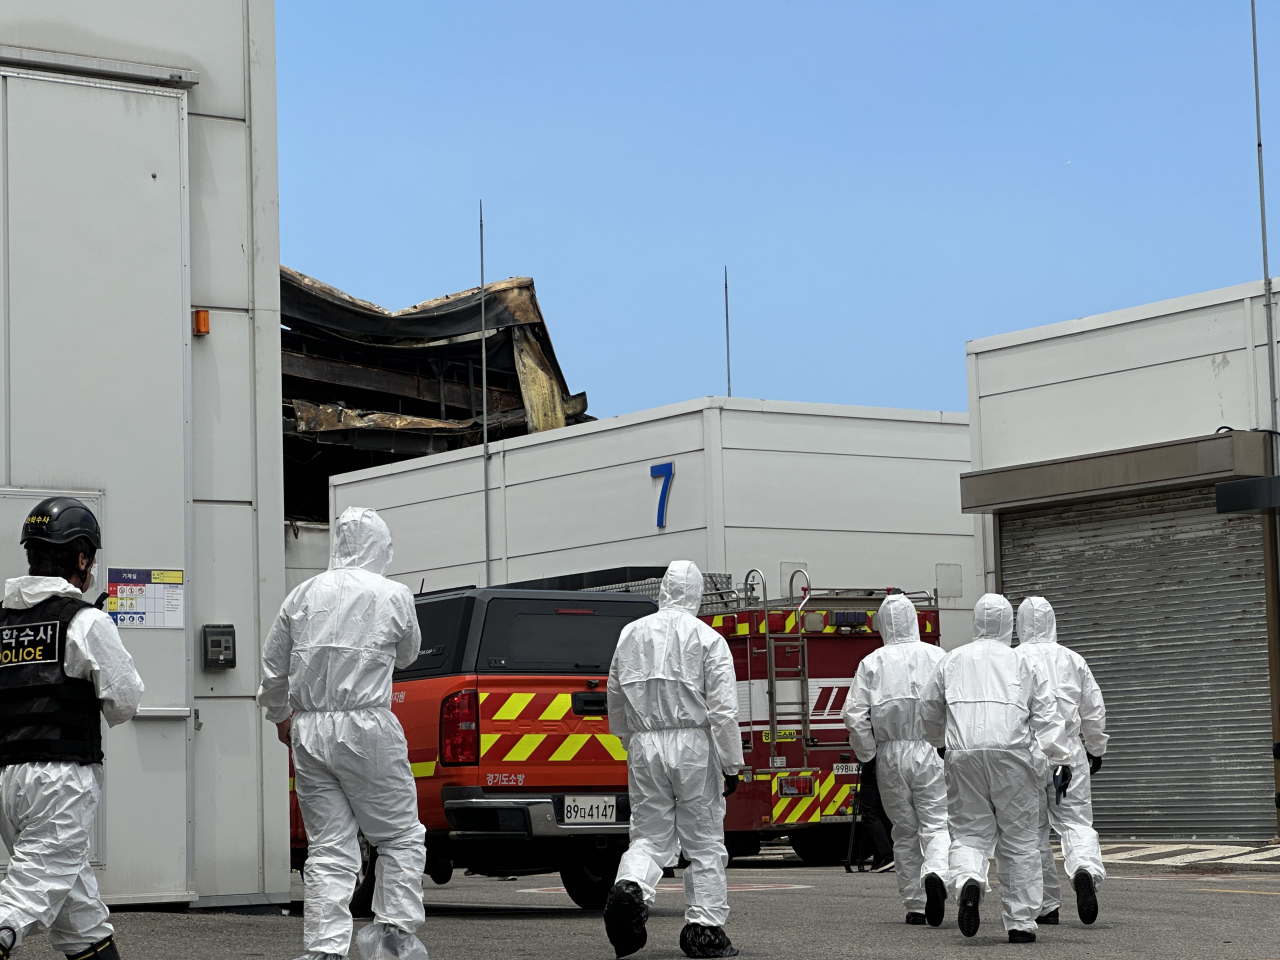 Officials conducting forensics operations make their way toward the Aricell Factory in Hwaseong, Gyeonggi Province, at noon on Tuesday. The first round of forensics operations in the factory lasted around 4 hours. (Lee Jung-joo/The Korea Herald)